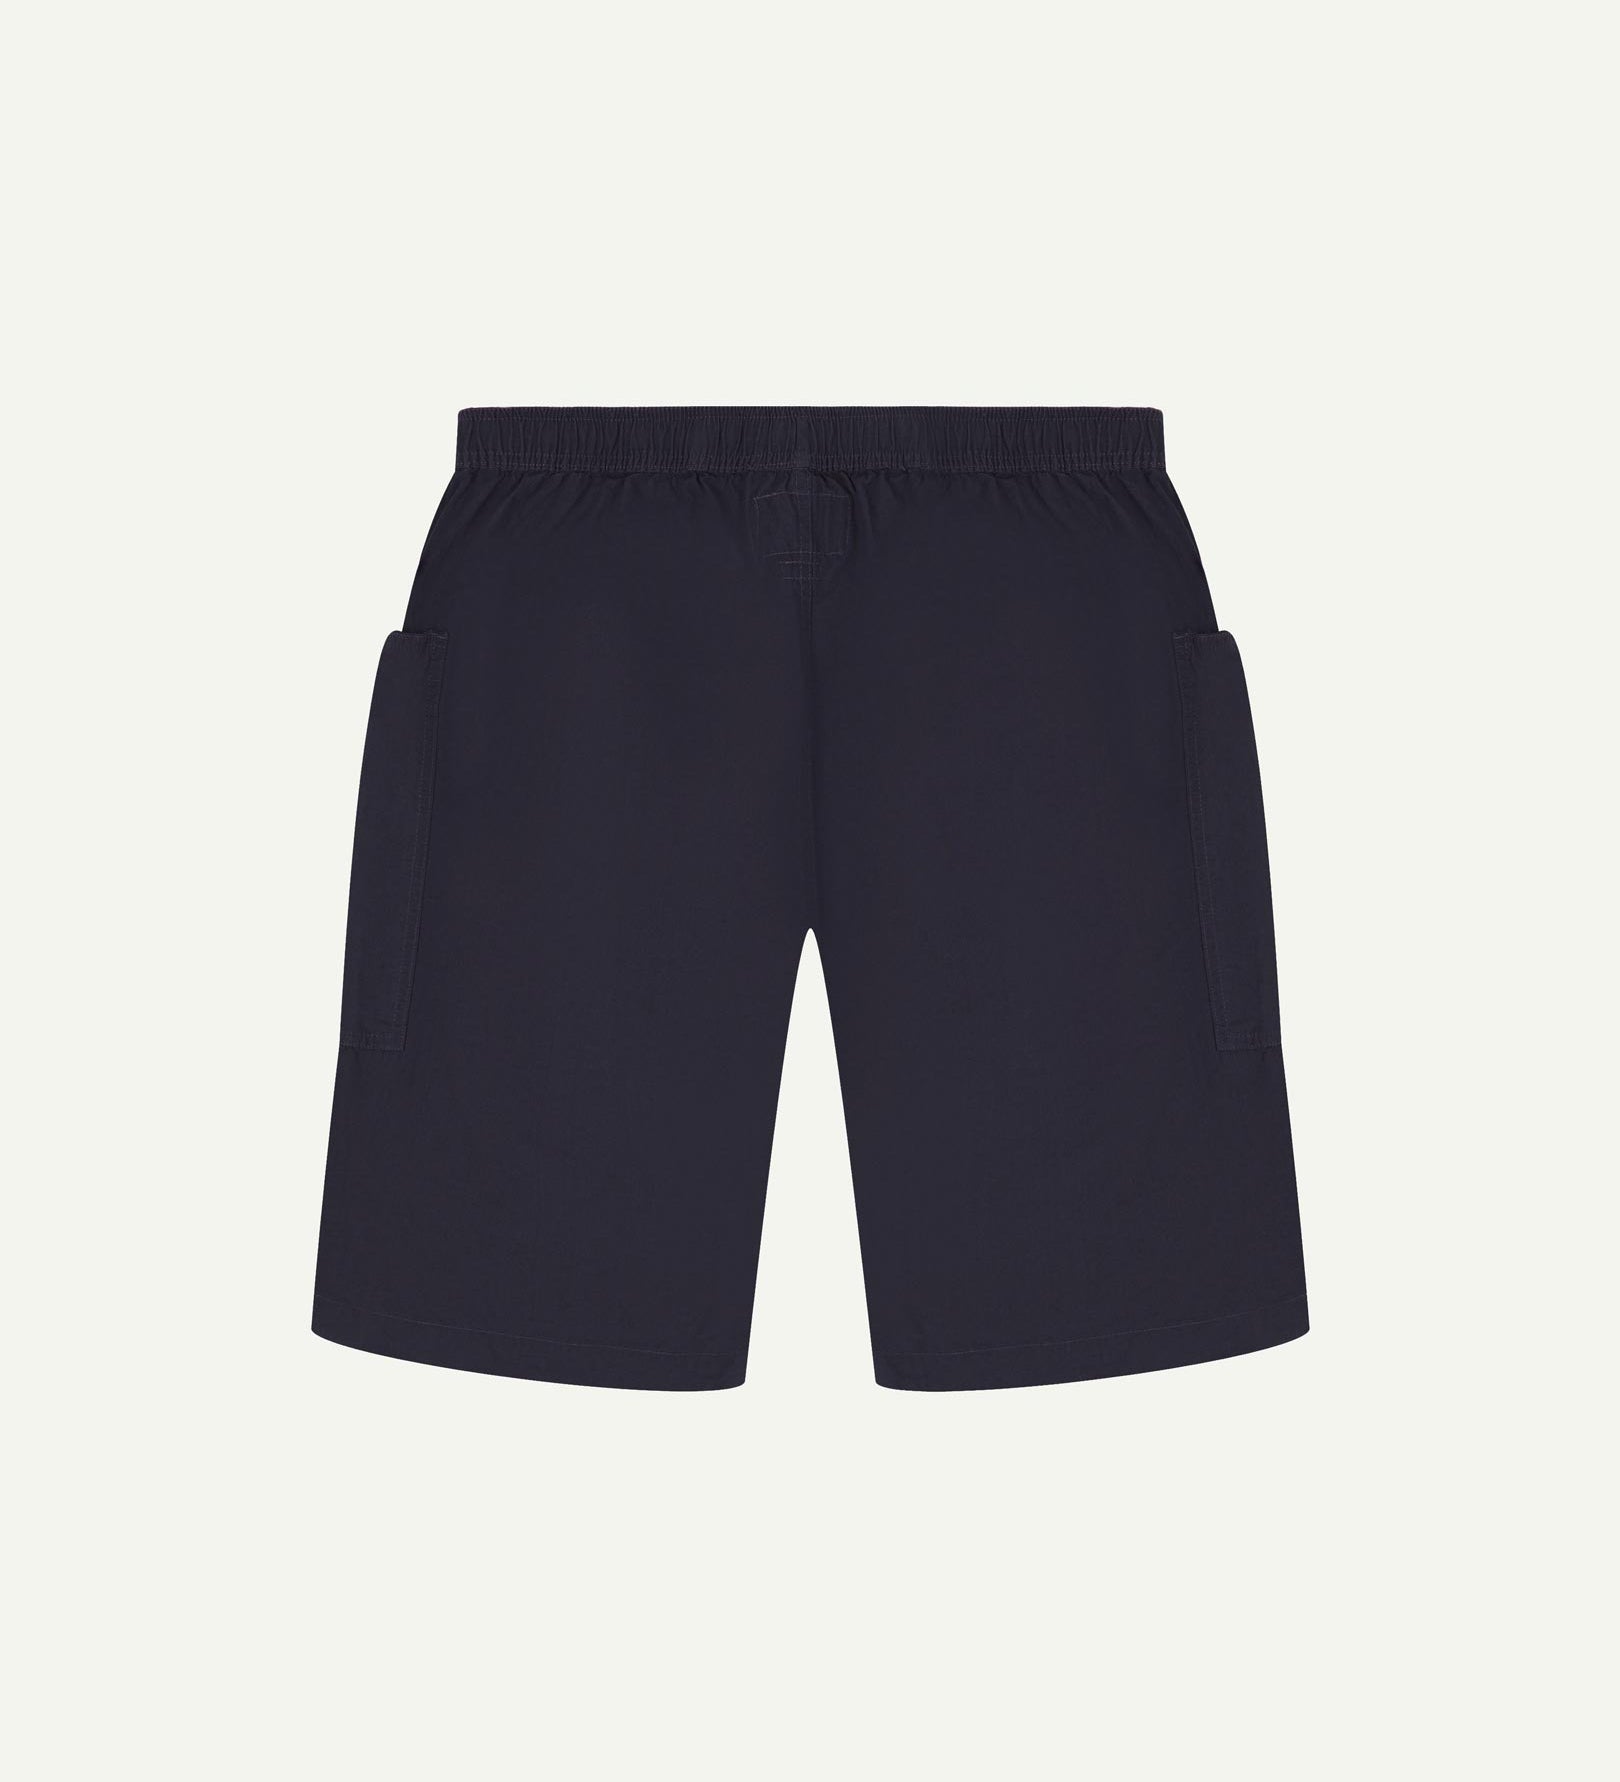 Back flat view of midnight blue organic cotton #5015 lightweight cotton shorts by Uskees. Clear view of lightweight elasticated waist and pockets.